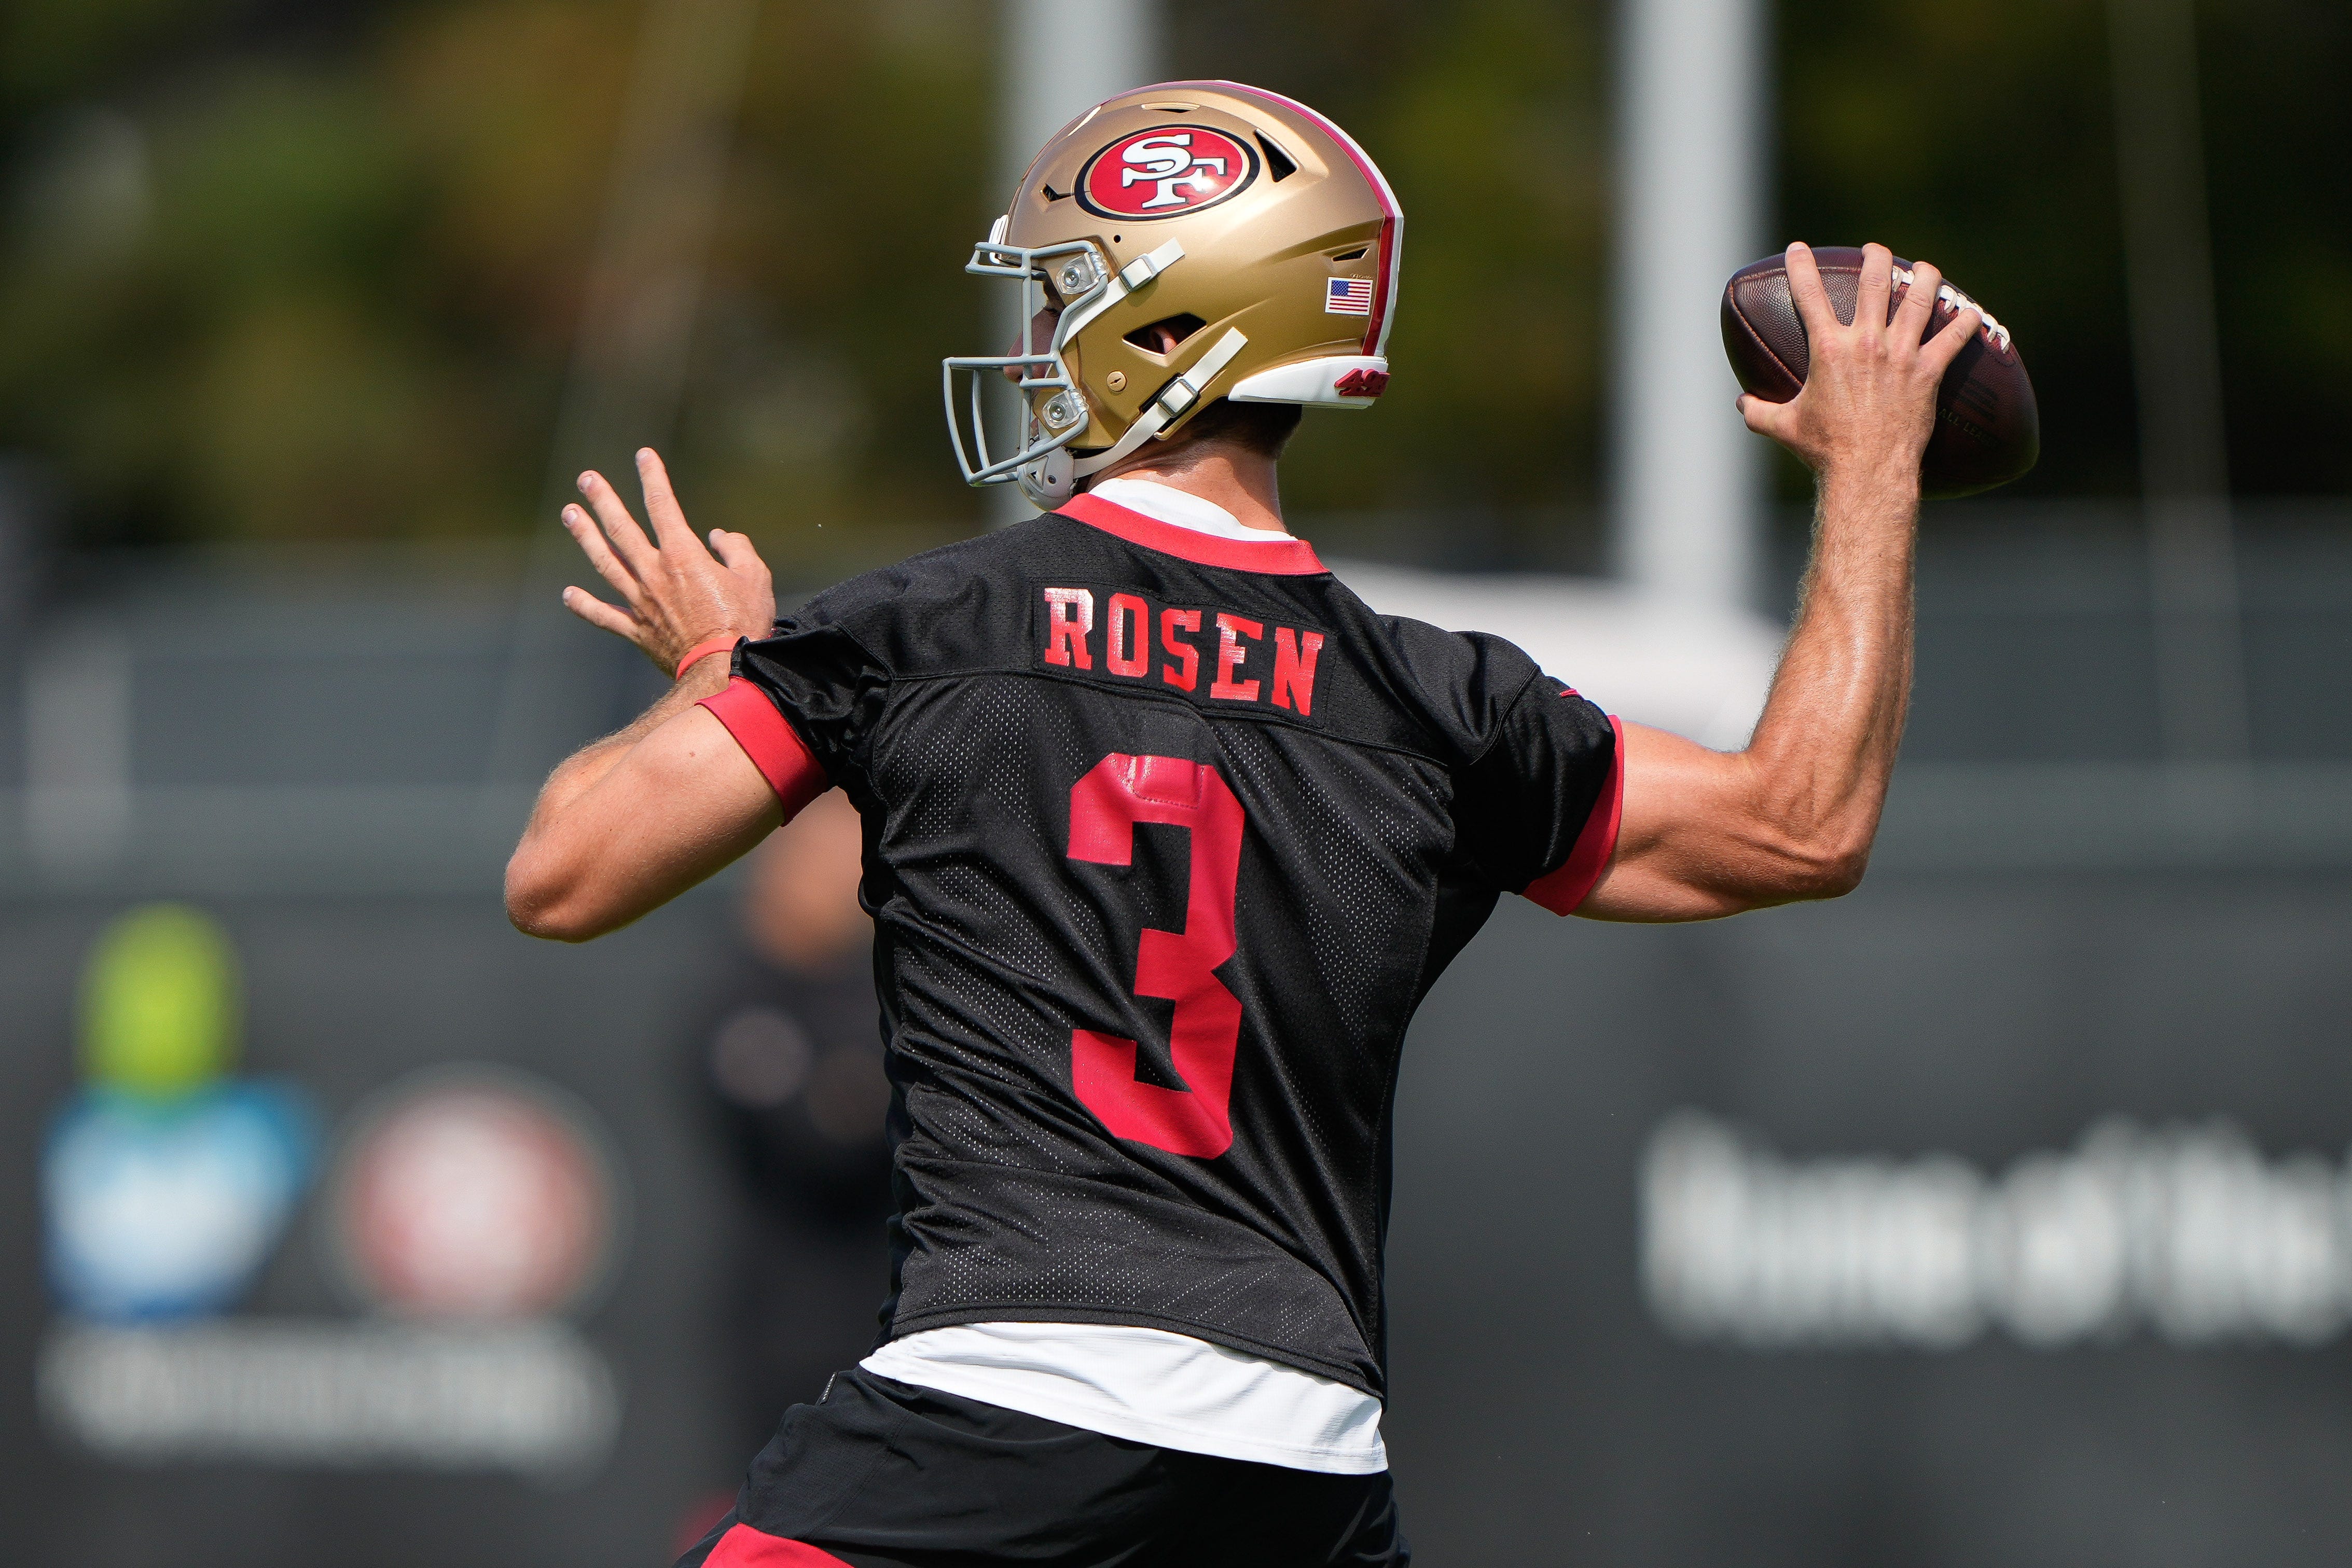 San Francisco 49ers waive Josh Rosen, the No. 10 overall pick in the 2018 NFL draft